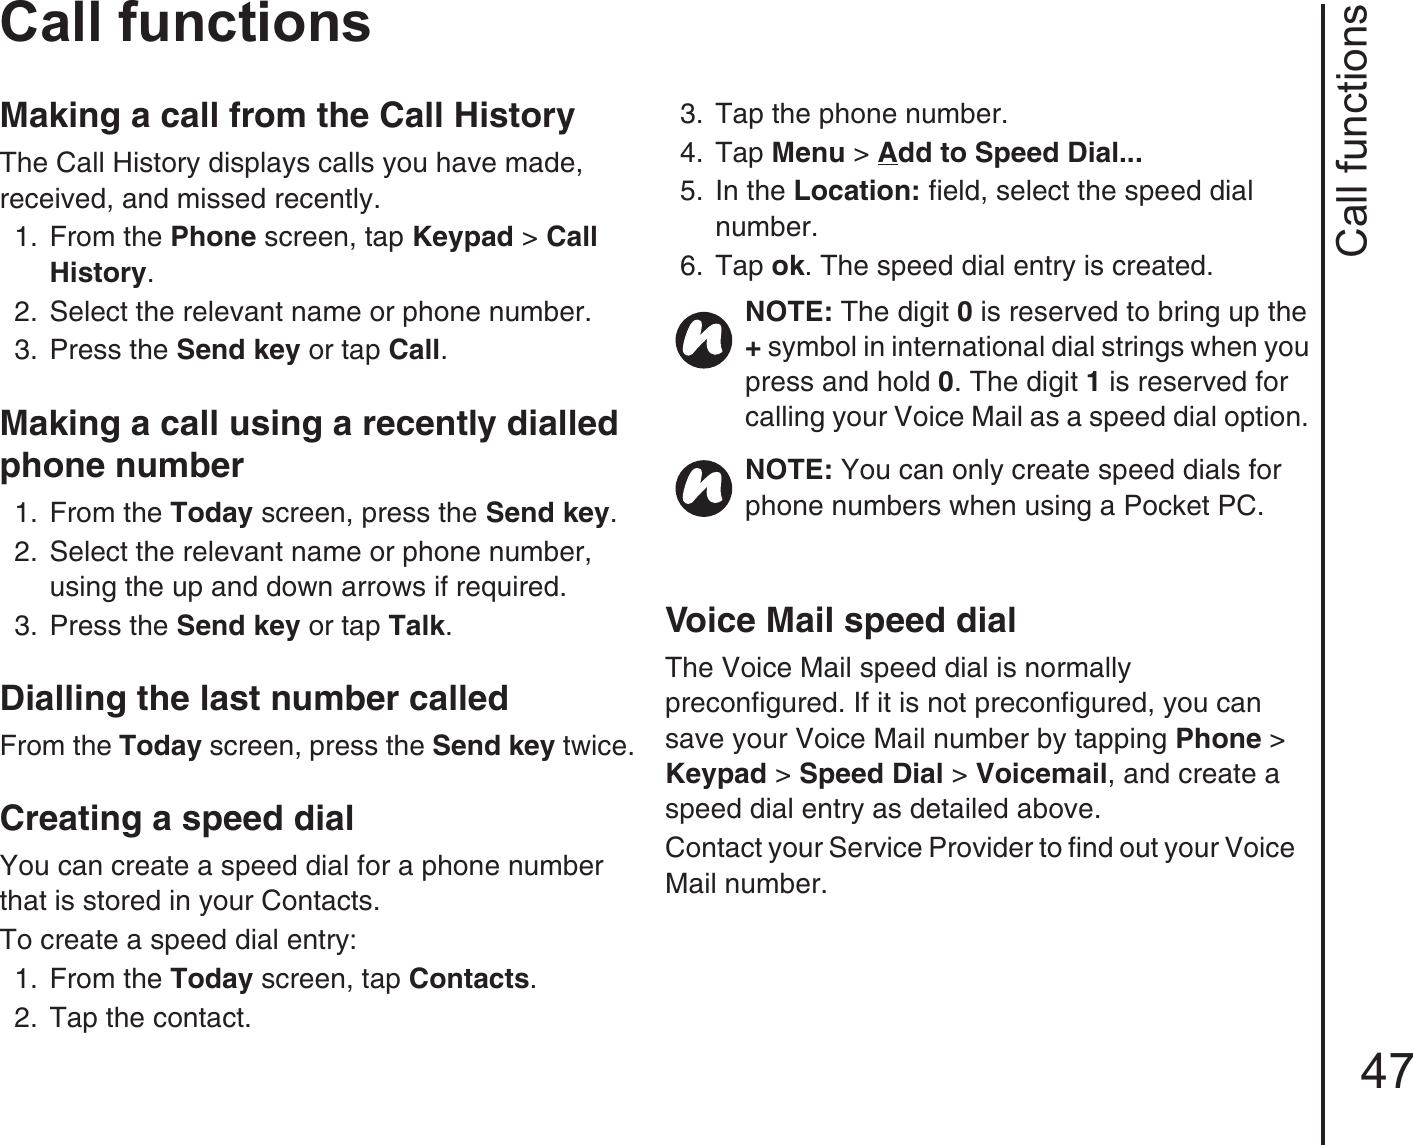 Call functions47Call functionsMaking a call from the Call HistoryThe Call History displays calls you have made, received, and missed recently. 1.  From the Phone screen, tap Keypad &gt; Call History.2.  Select the relevant name or phone number. 3.  Press the Send key or tap Call.Making a call using a recently dialled phone number 1.  From the Today screen, press the Send key. 2.  Select the relevant name or phone number, using the up and down arrows if required. 3.  Press the Send key or tap Talk.Dialling the last number called From the Today screen, press the Send key twice.Creating a speed dialYou can create a speed dial for a phone number that is stored in your Contacts.To create a speed dial entry:1.  From the Today screen, tap Contacts. 2.  Tap the contact.3.  Tap the phone number. 4.  Tap Menu &gt; Add to Speed Dial... 5.  In the Location: field, select the speed dial number. 6.  Tap ok. The speed dial entry is created.Voice Mail speed dialThe Voice Mail speed dial is normally preconfigured. If it is not preconfigured, you can save your Voice Mail number by tapping Phone &gt; Keypad &gt; Speed Dial &gt; Voicemail, and create a speed dial entry as detailed above.Contact your Service Provider to find out your Voice Mail number.NOTE: The digit 0 is reserved to bring up the + symbol in international dial strings when you press and hold 0. The digit 1 is reserved for calling your Voice Mail as a speed dial option. NOTE: You can only create speed dials for phone numbers when using a Pocket PC.